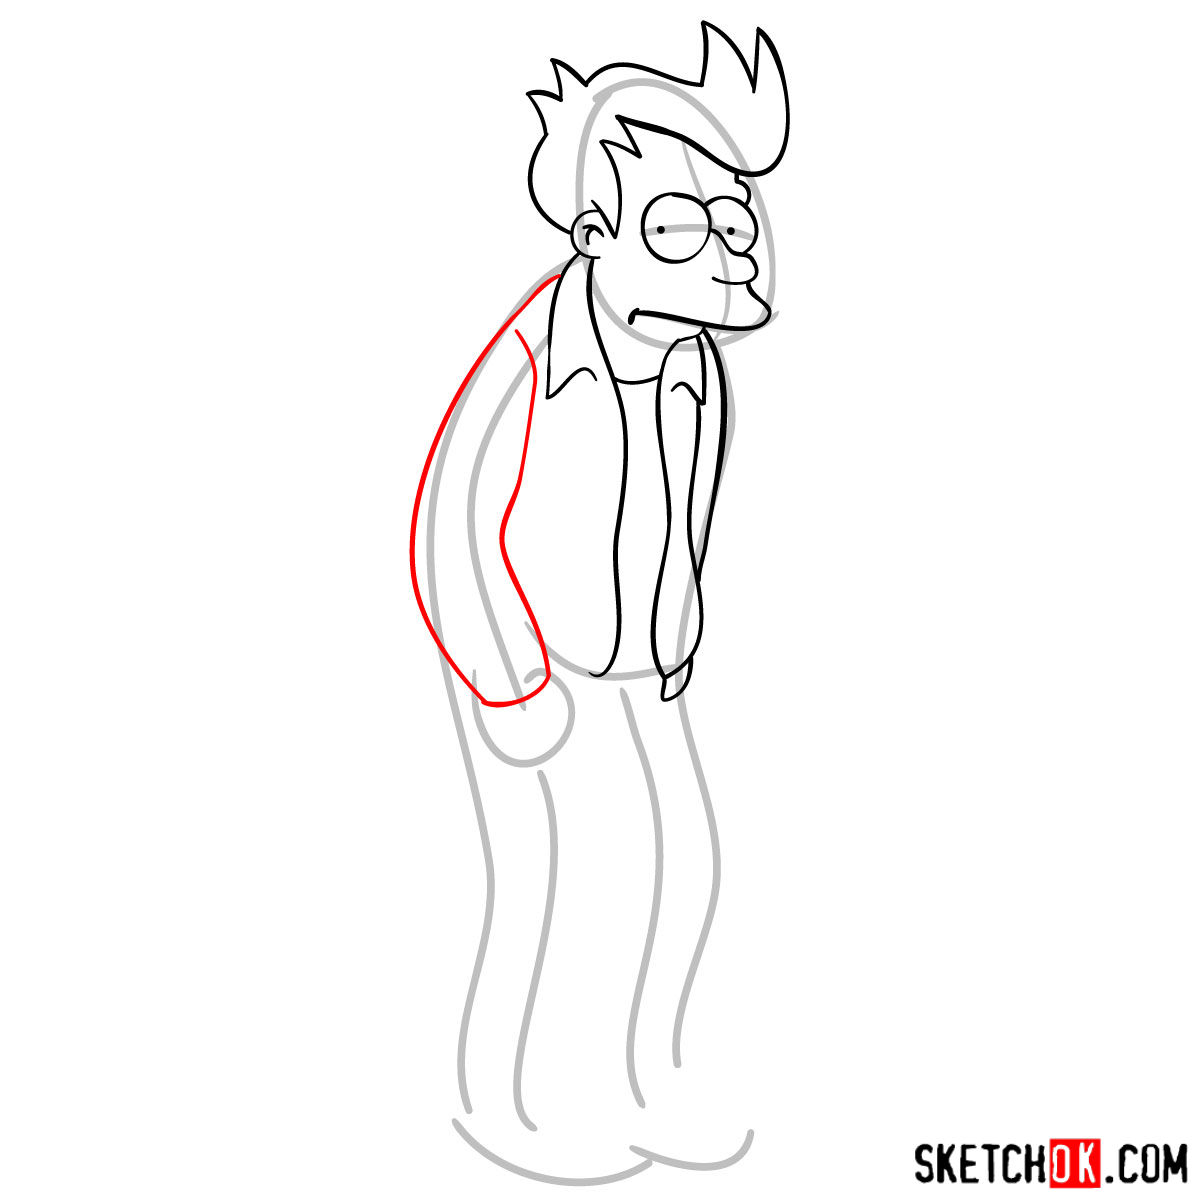 How to draw Philip J. Fry step by step - step 06